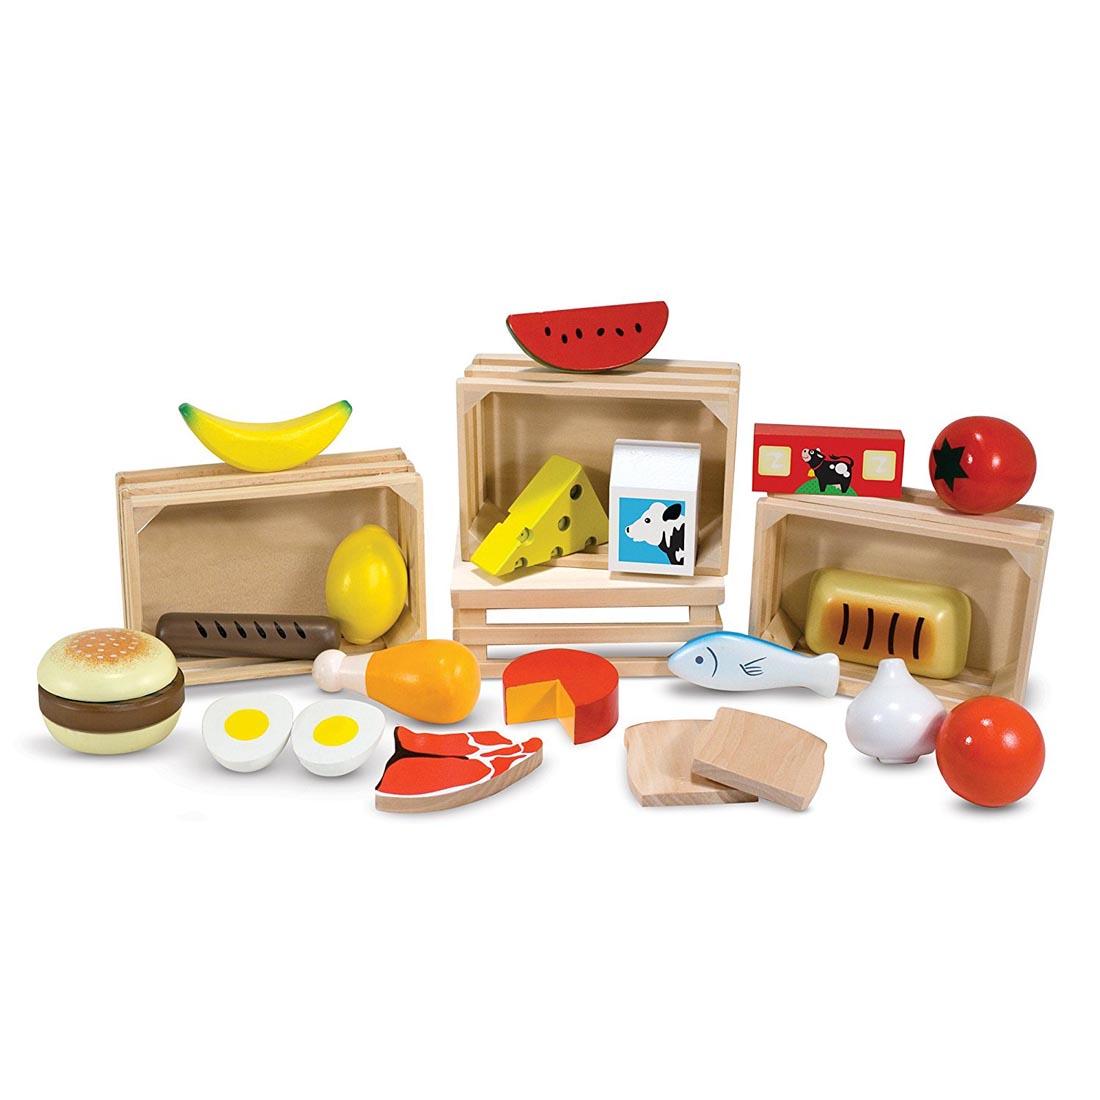 Wooden Pretend Play Food Groups Set